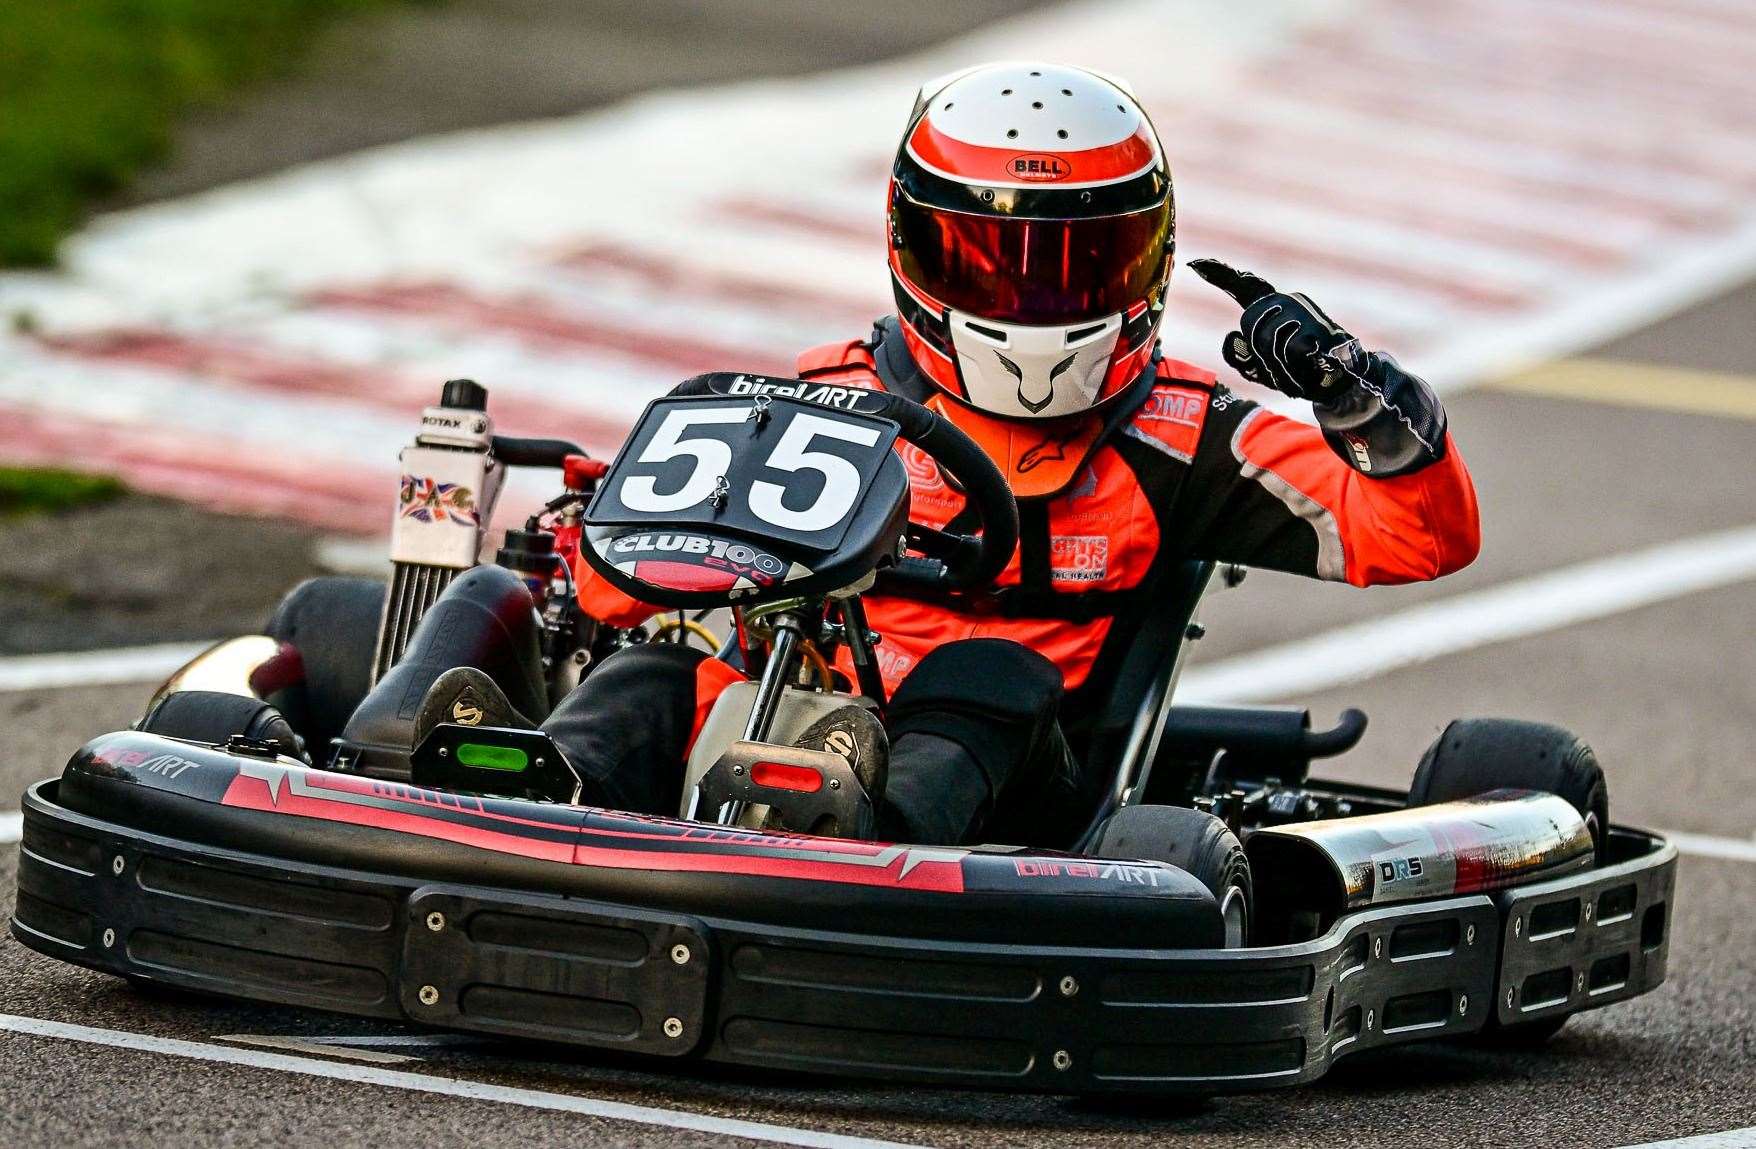 Elijah Hazelwood, 12, celebrates one of his many wins on the track. Picture: Club100 Racing / John Patterson